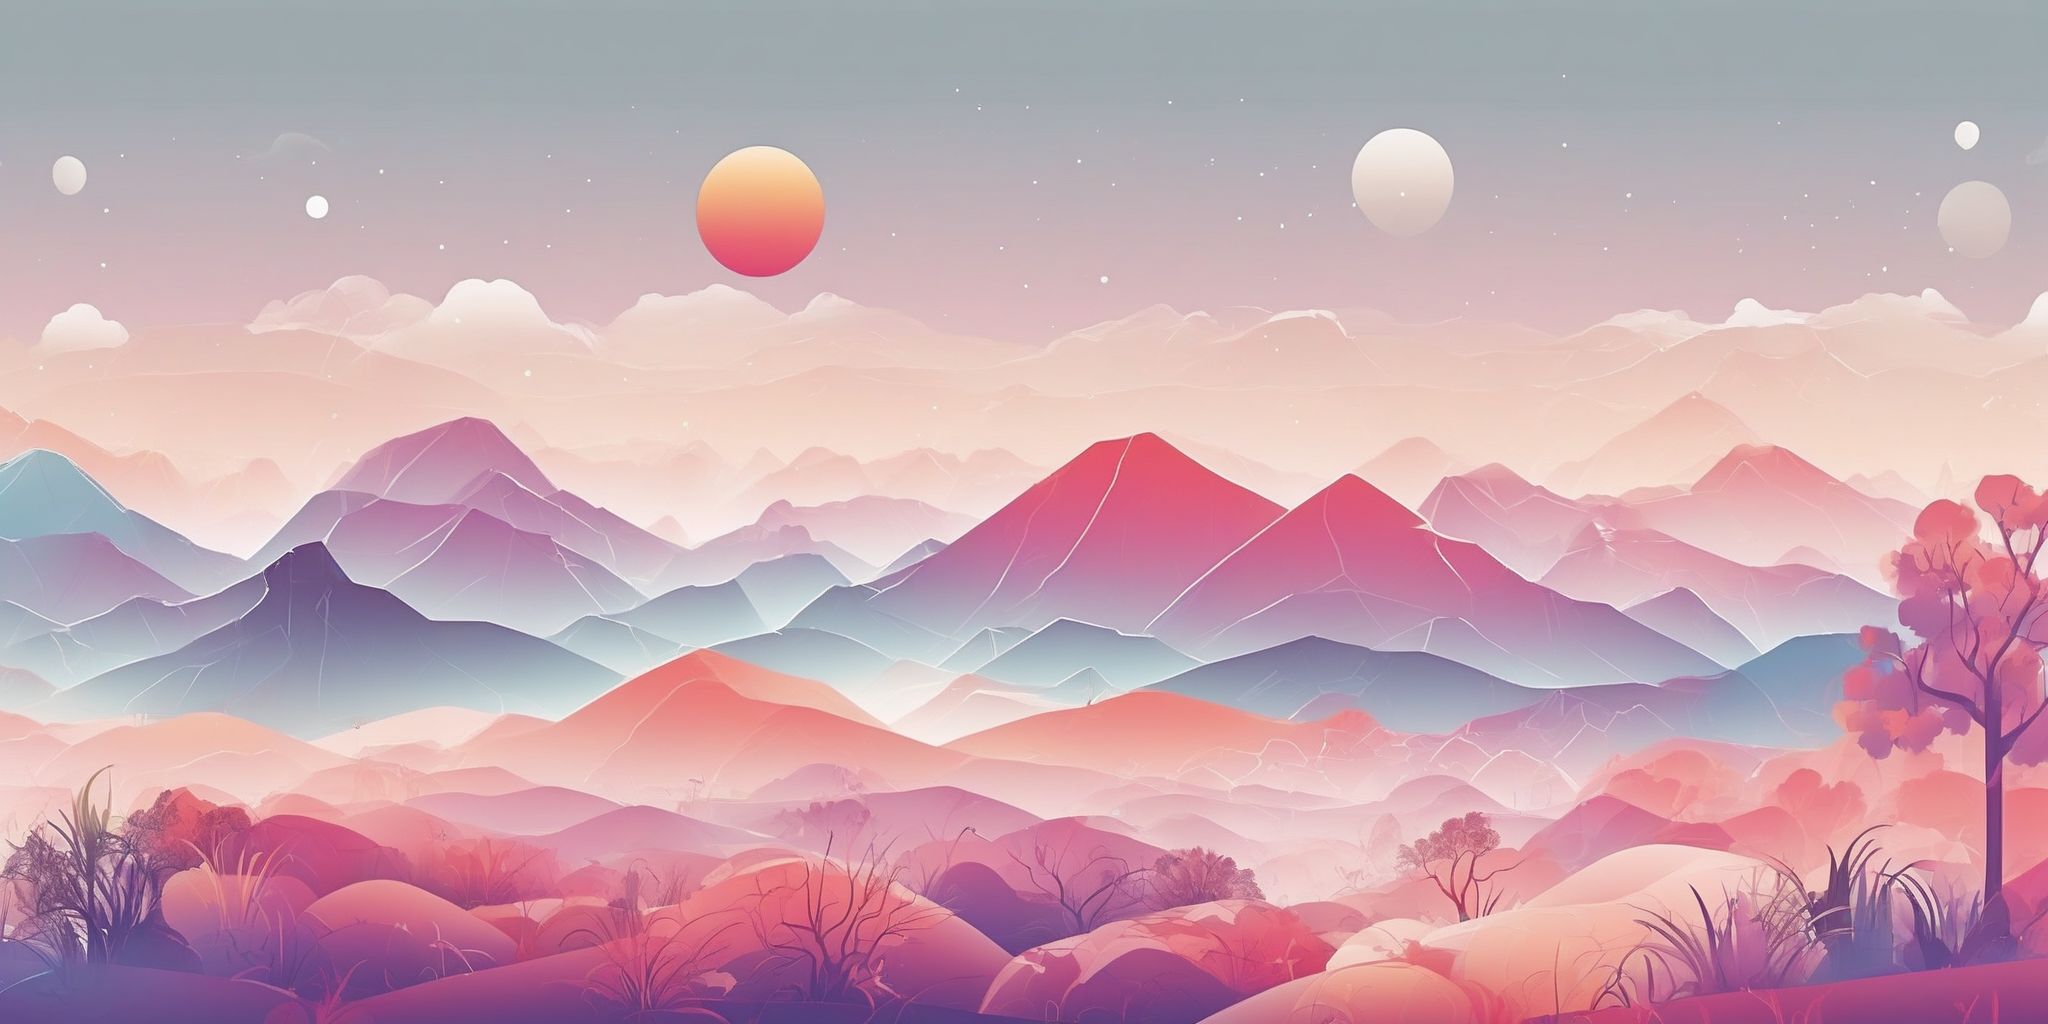 Zone in illustration style with gradients and white background